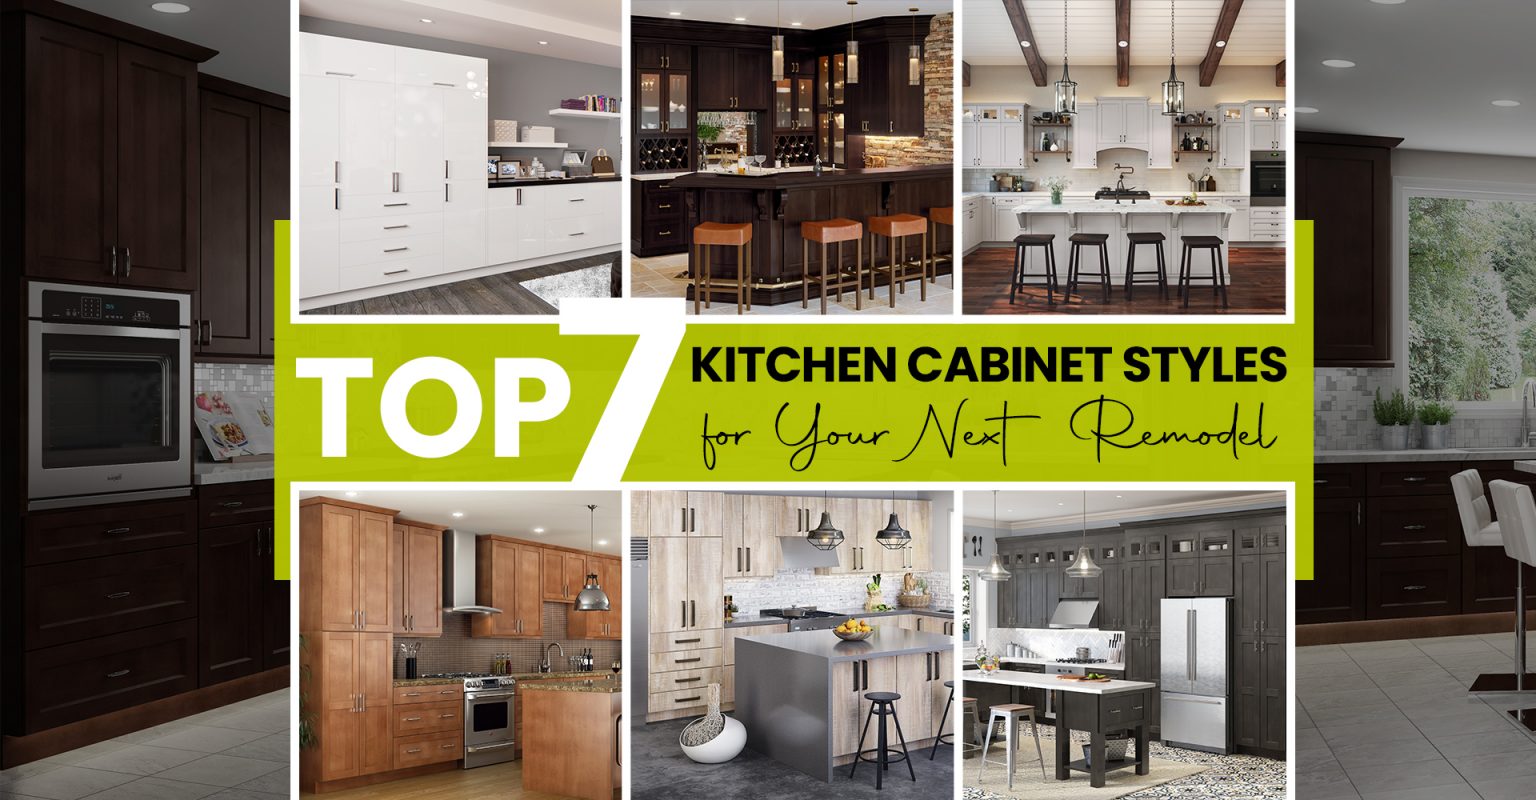 Top 7 Kitchen Cabinet Styles for Your Next Remodel | CabinetCorp